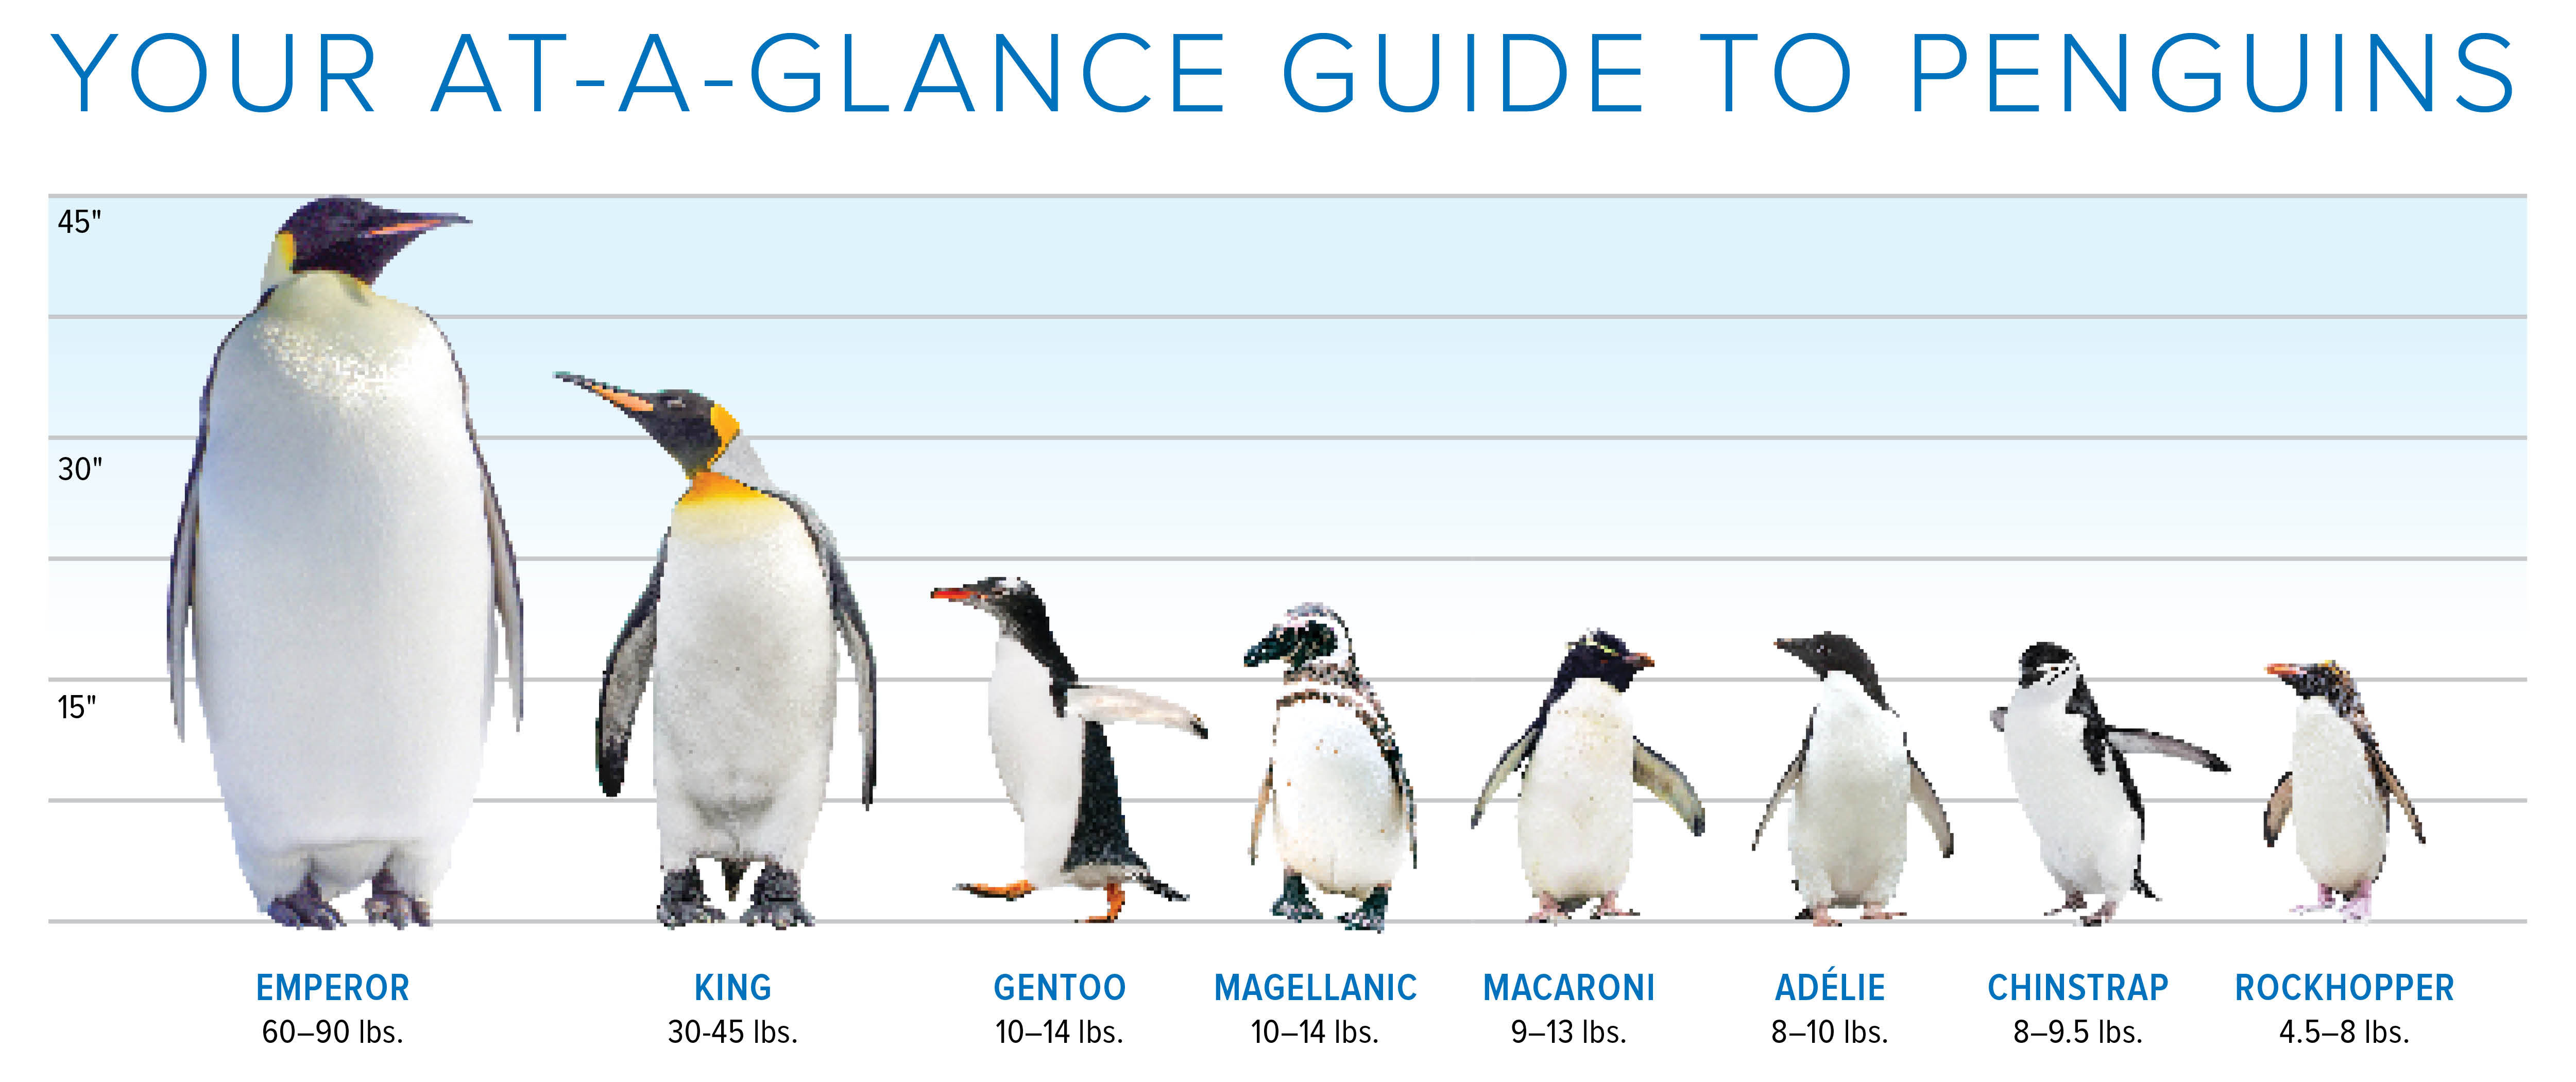 At a glance penguin chart.jpg